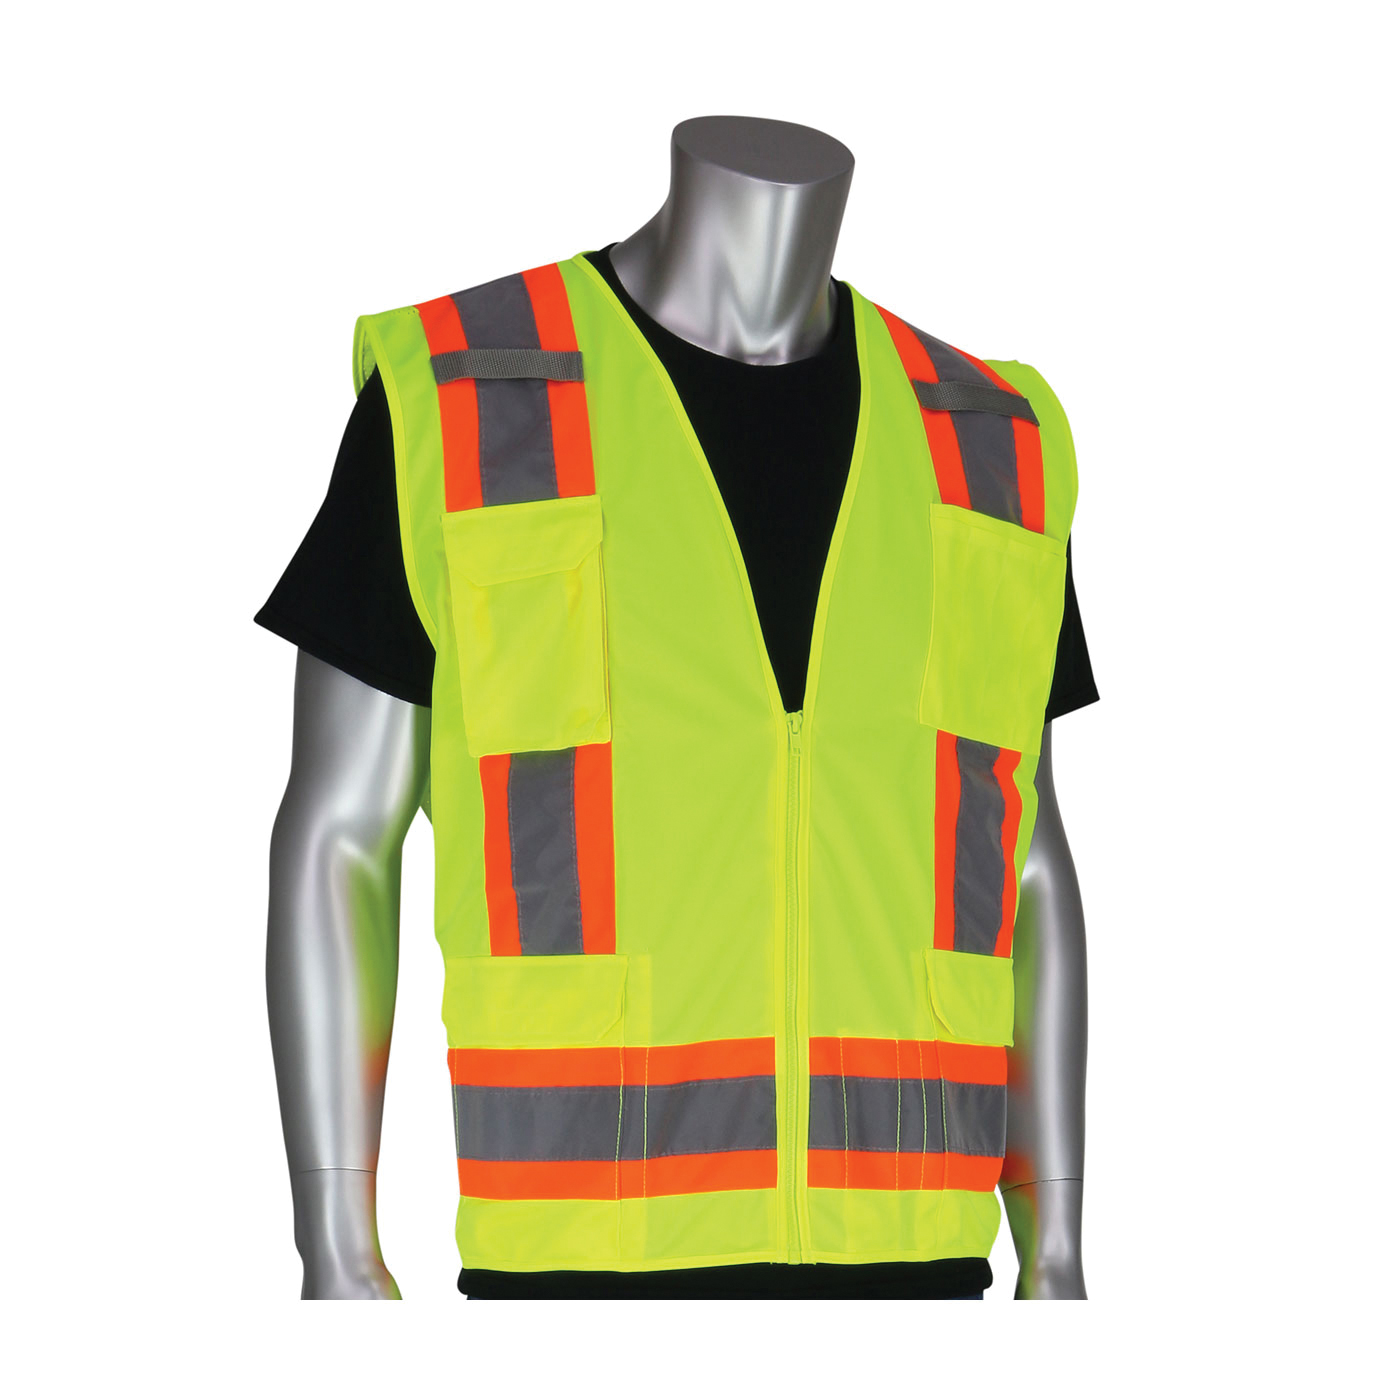 PIP® 302-0500-YEL/4X 2-Tone Surveyor Safety Vest, 4XL, Hi-Viz Lime Yellow, Polyester/Solid Tricot, Zipper Closure, 11 Pockets, ANSI Class: Class 2, Specifications Met: ANSI 107 Type R